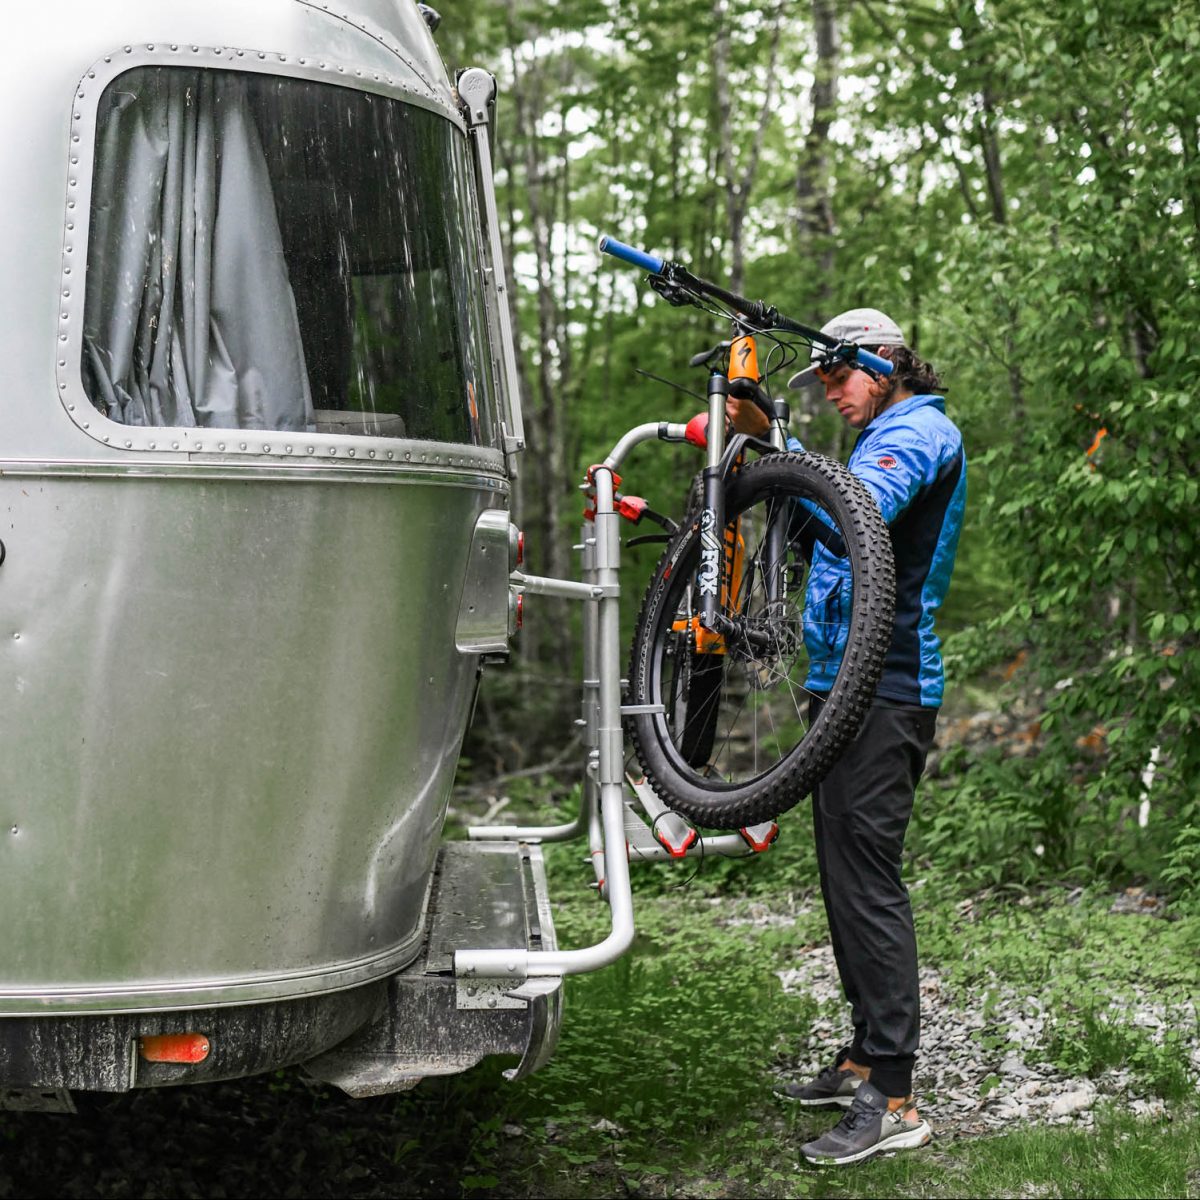 ZOOMZOOMCREATIVECO_AIRSTREAM_ASCPRODUCTSROUND1_SPRINGSUMMER2019-64